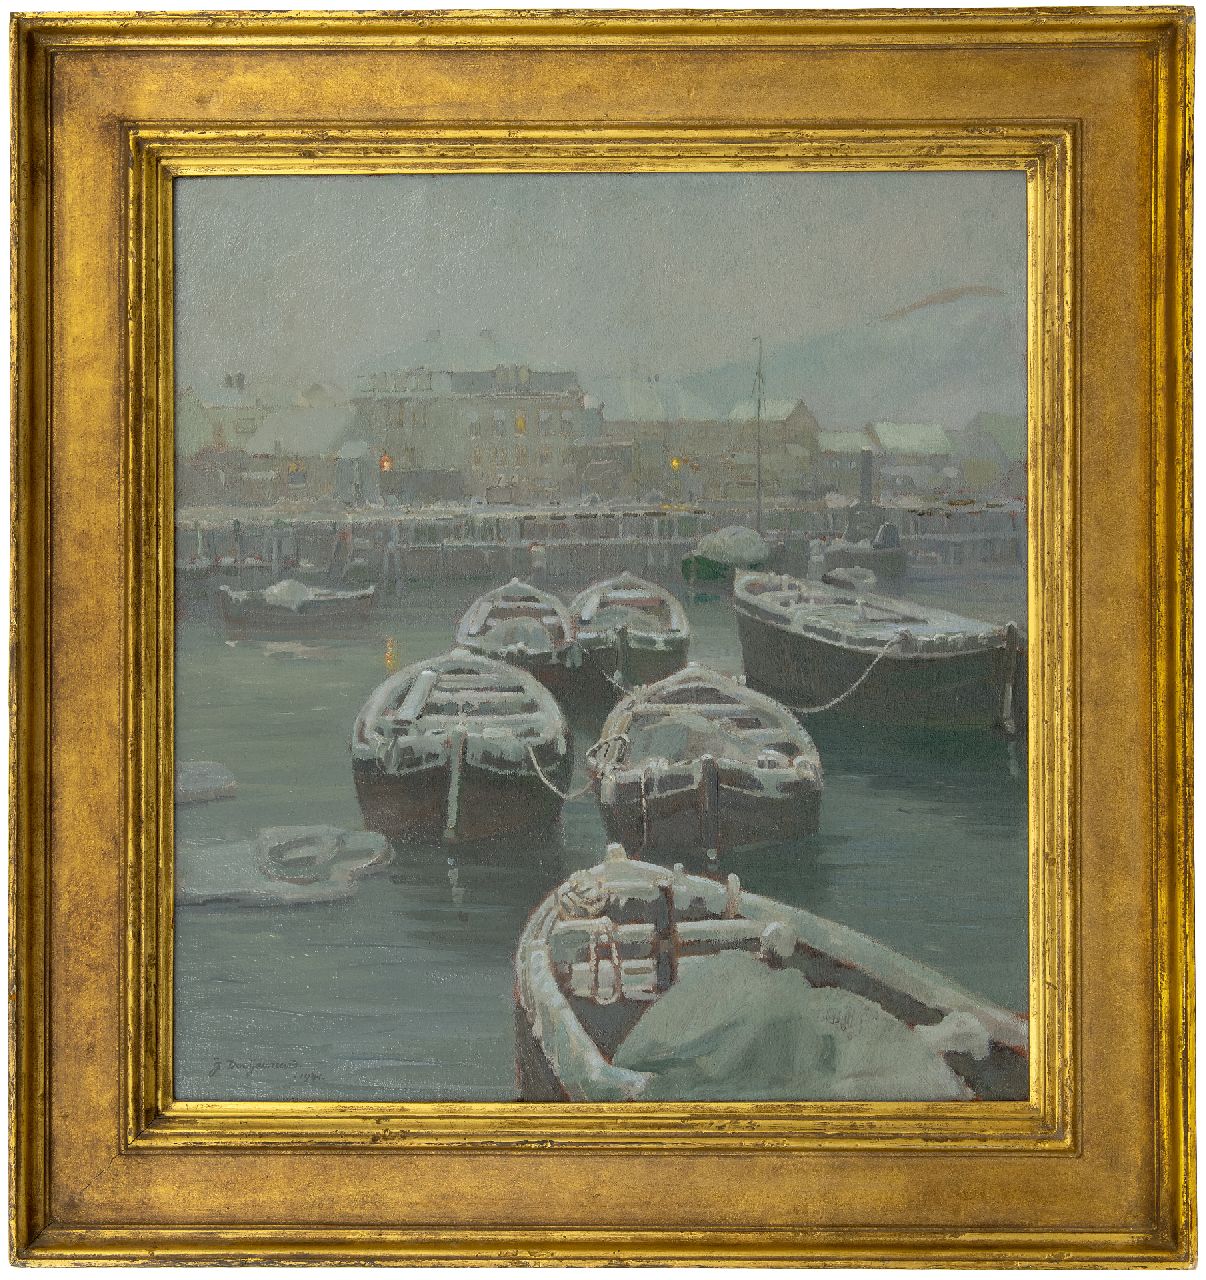 Dooijewaard J.  | Jacob 'Jaap' Dooijewaard | Paintings offered for sale | A view of Elvehavn, Trondheim, oil on canvas 61.1 x 56.5 cm, signed l.l. and with initials on the reverse and dated on the stretcher 1941